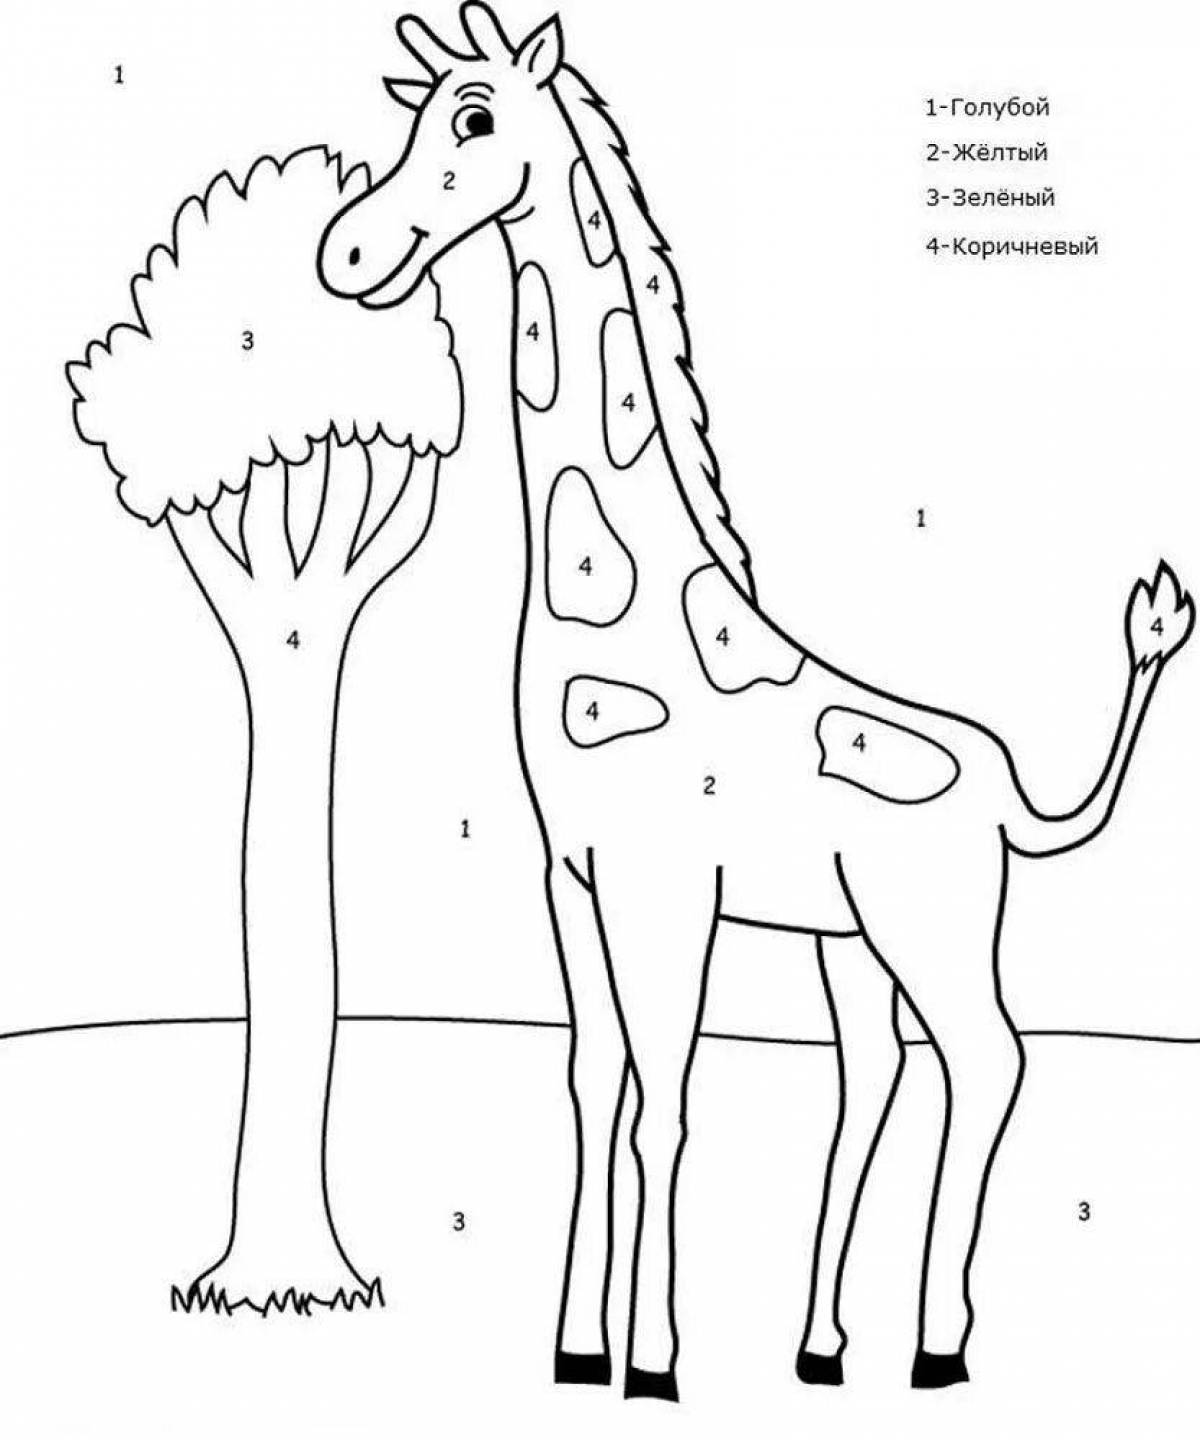 Fun animal coloring by numbers